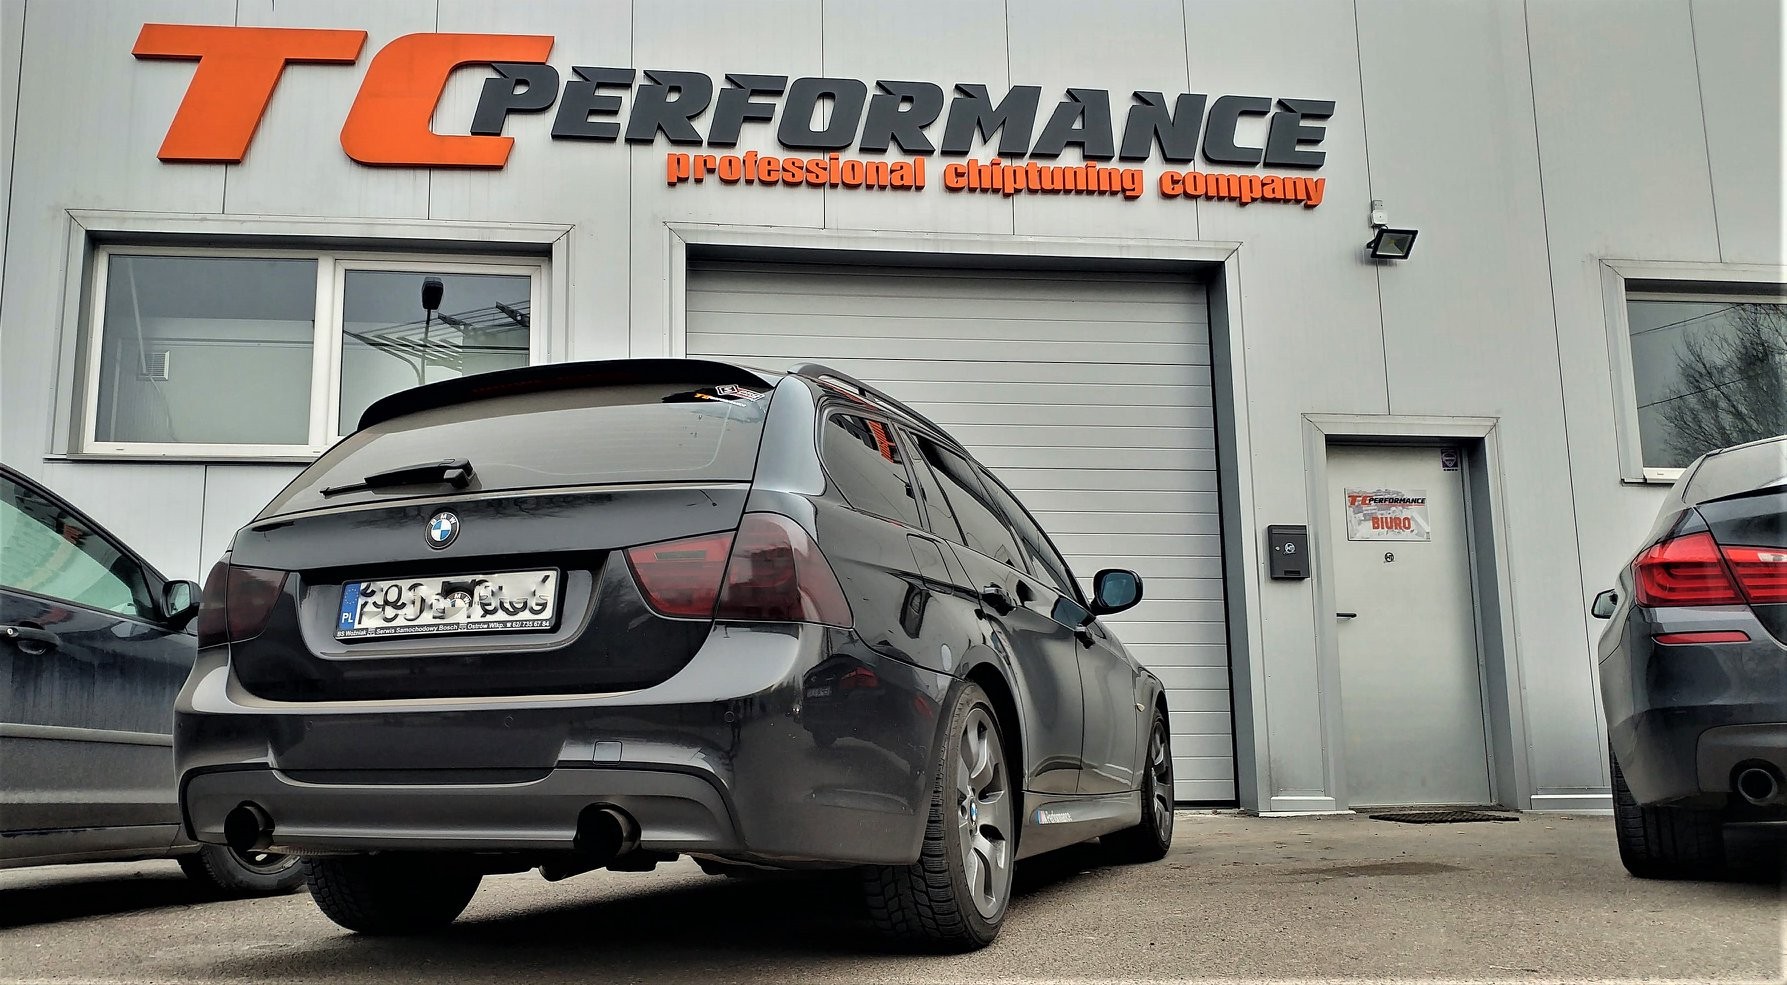 Tuning BMW 330d Touring E91, front